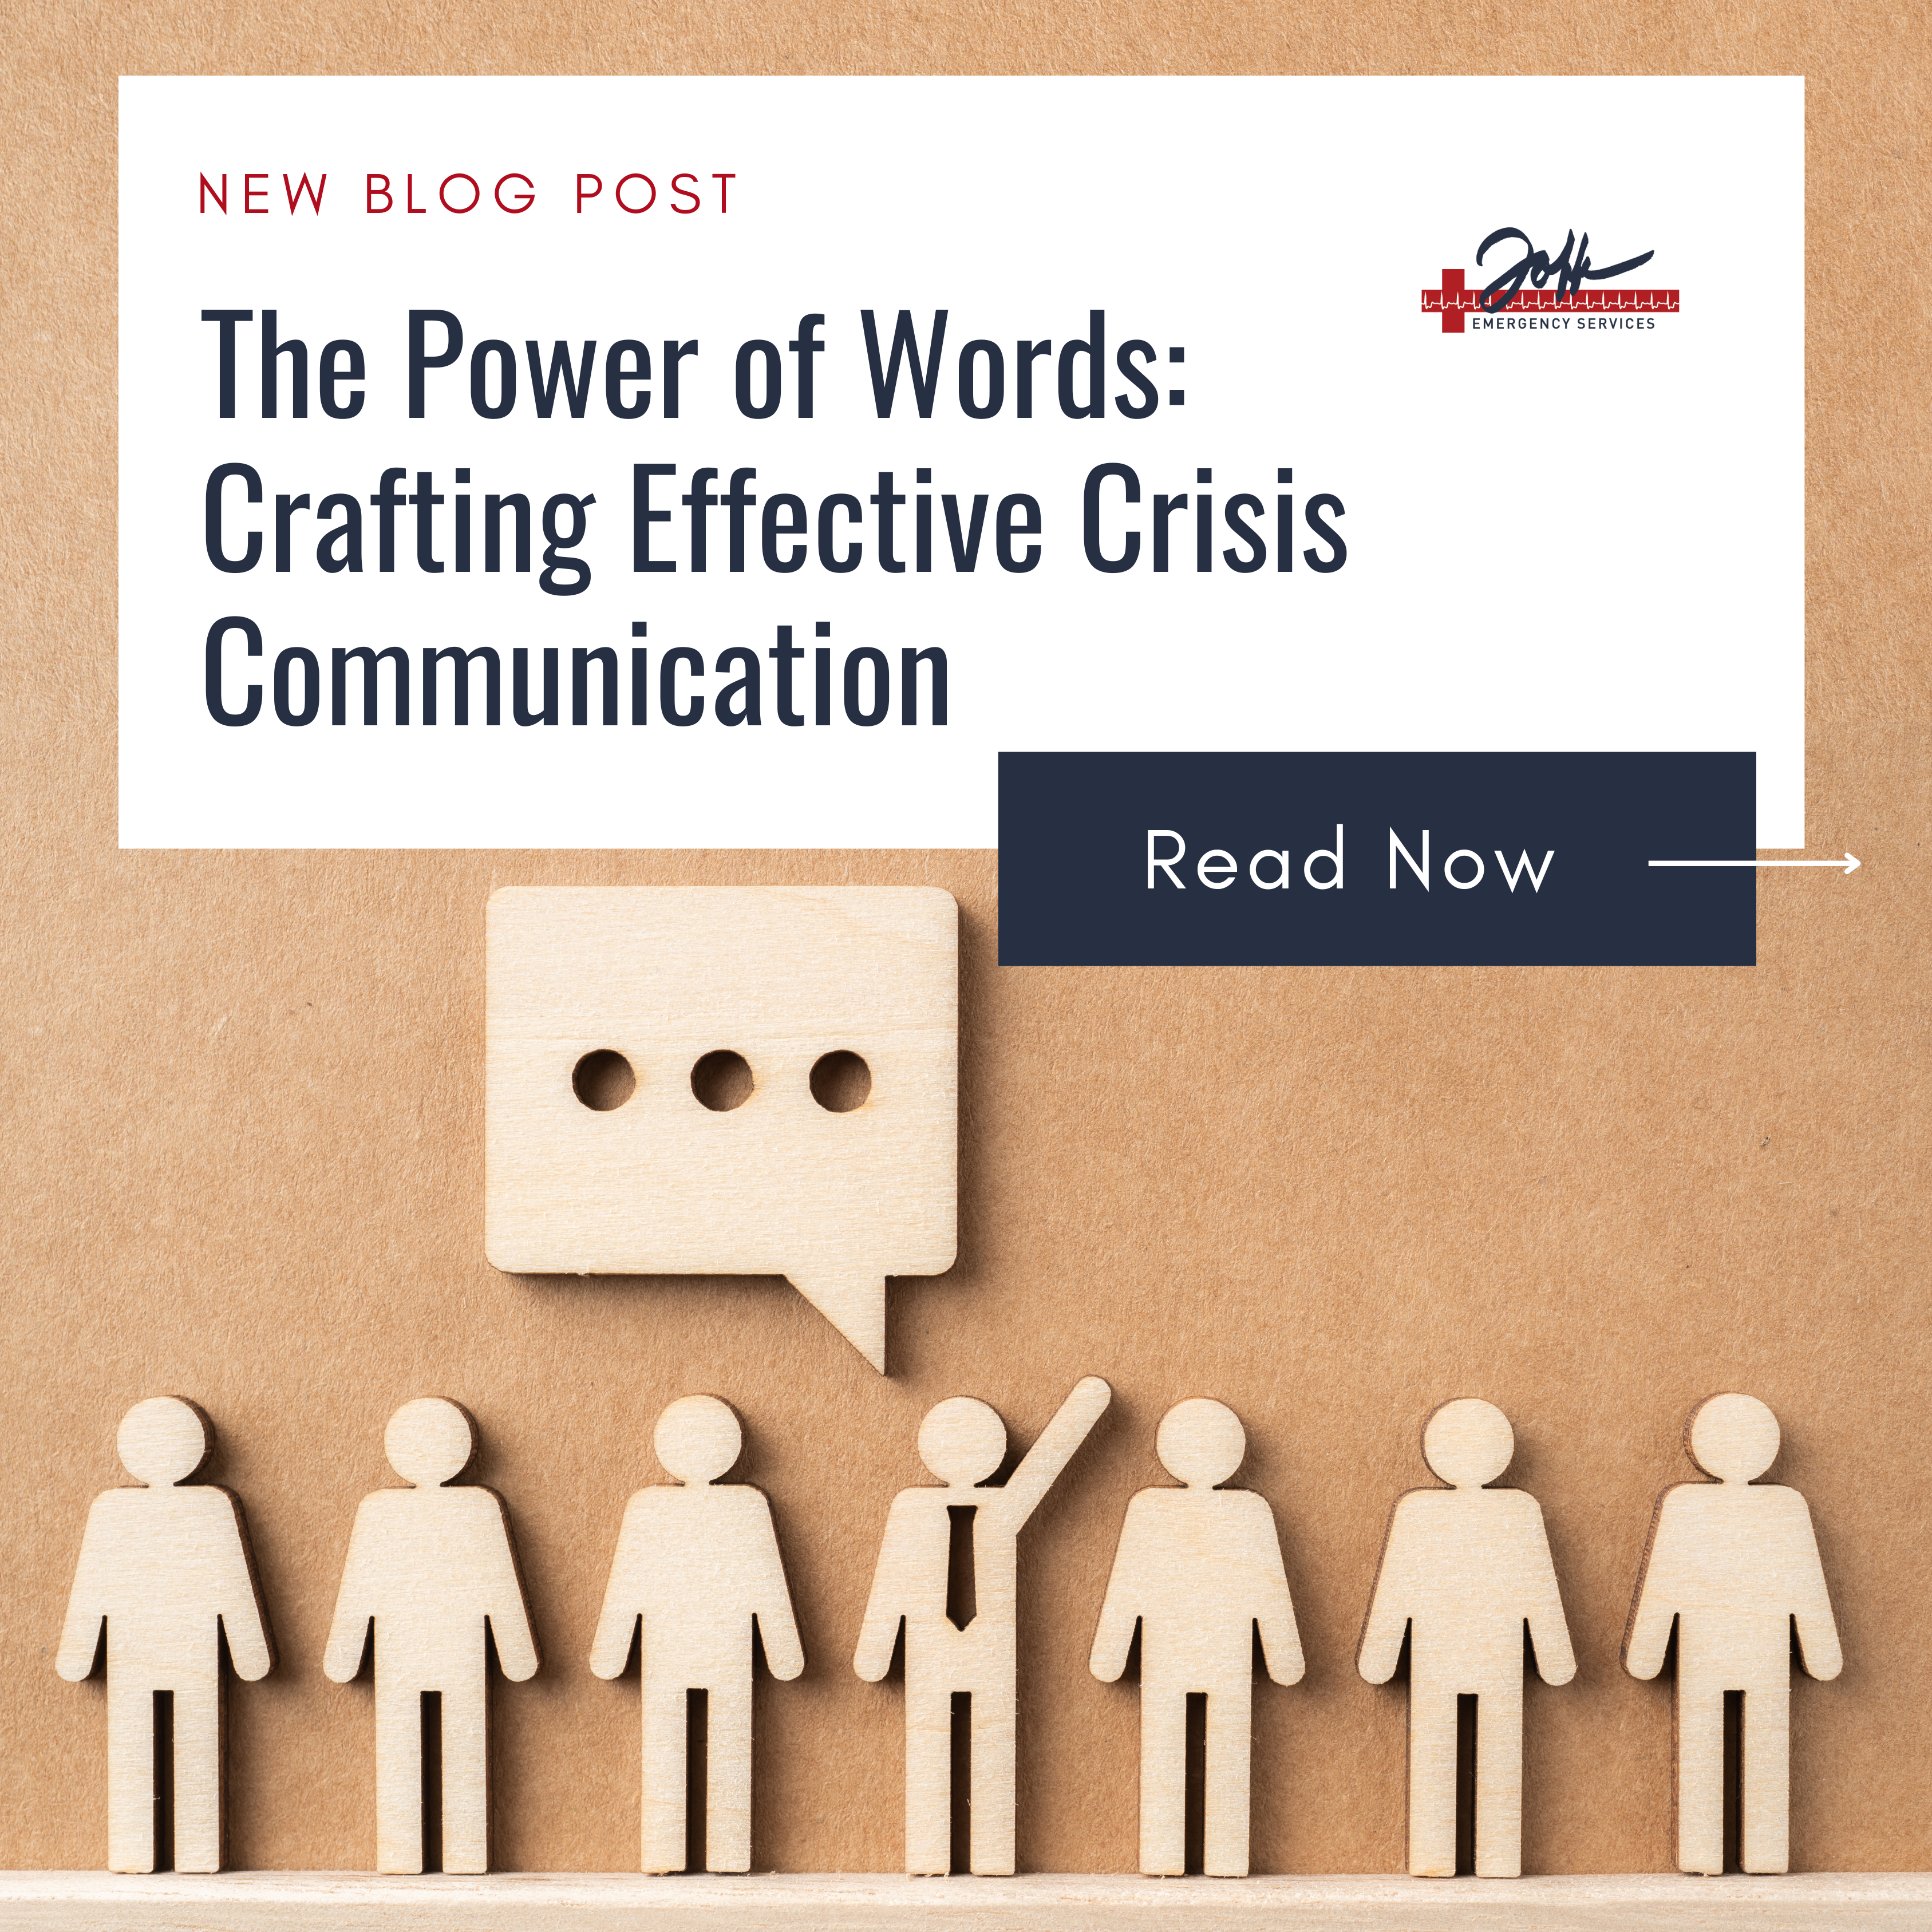 The Power of Words: Crafting Effective Crisis Communications